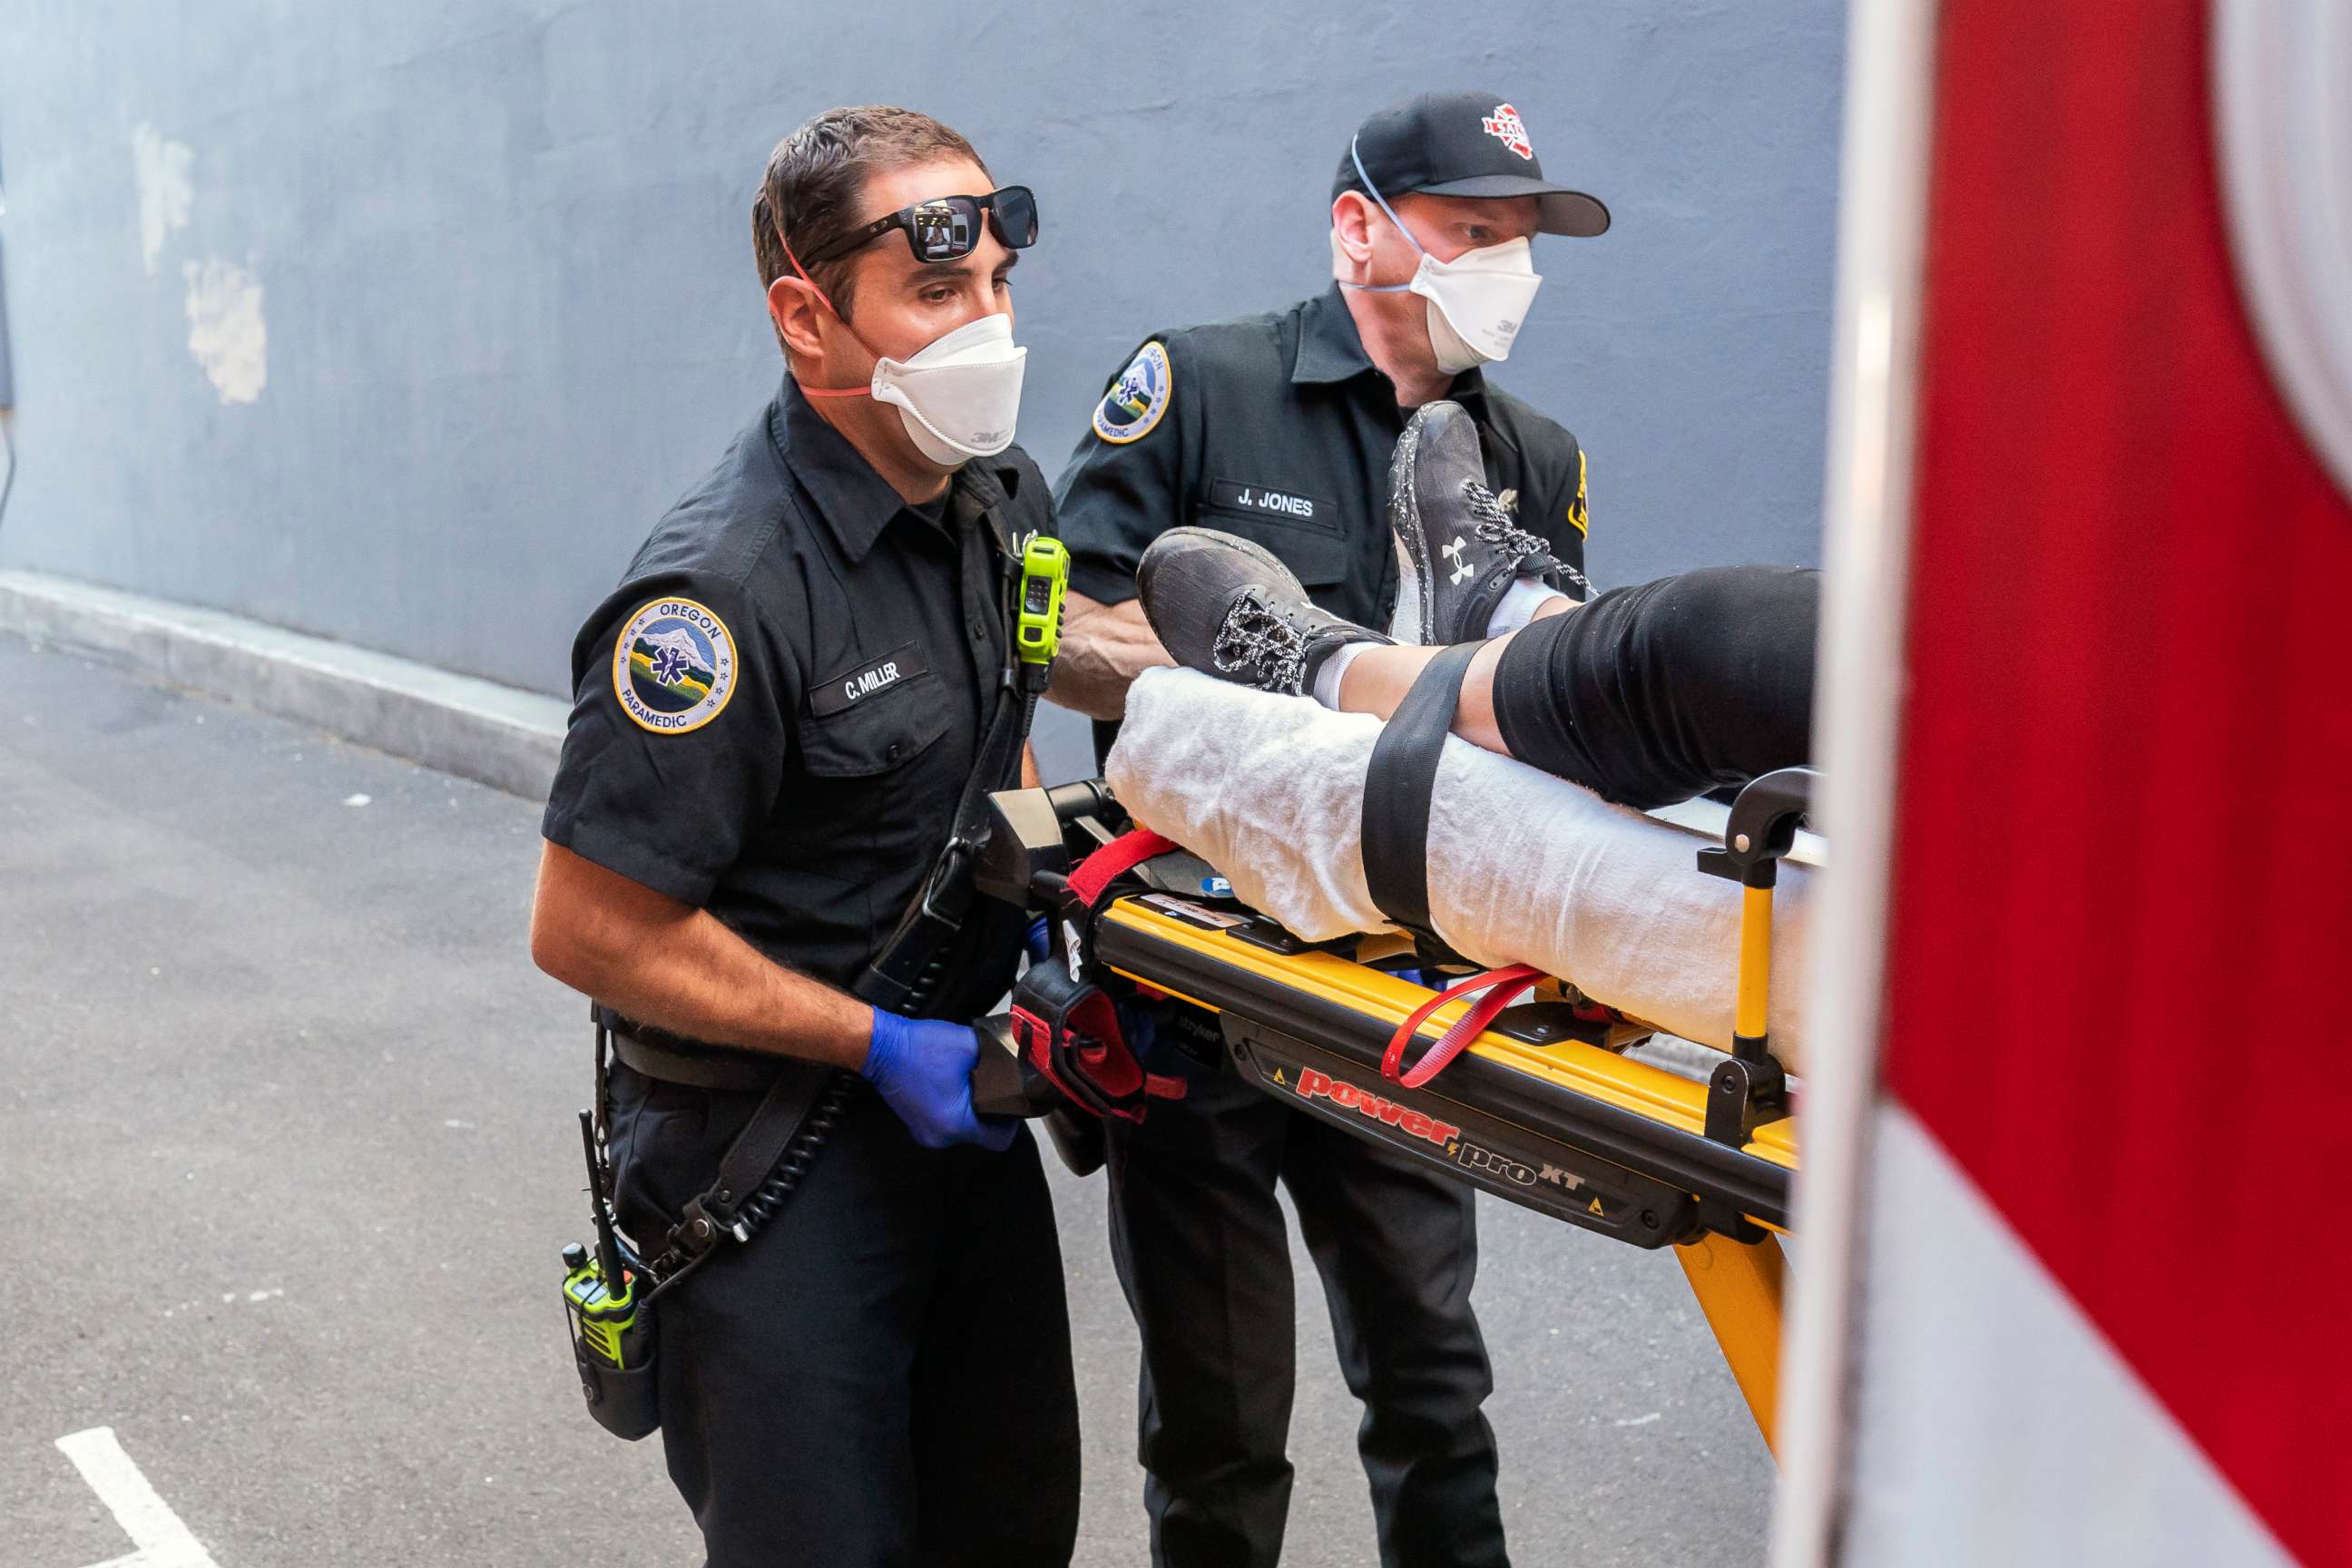 PHOTO: Paramedics Cody Miller, left, and Justin Jones respond to a heat exposure call during a heat wave, June 26, 2021, in Salem, Ore.